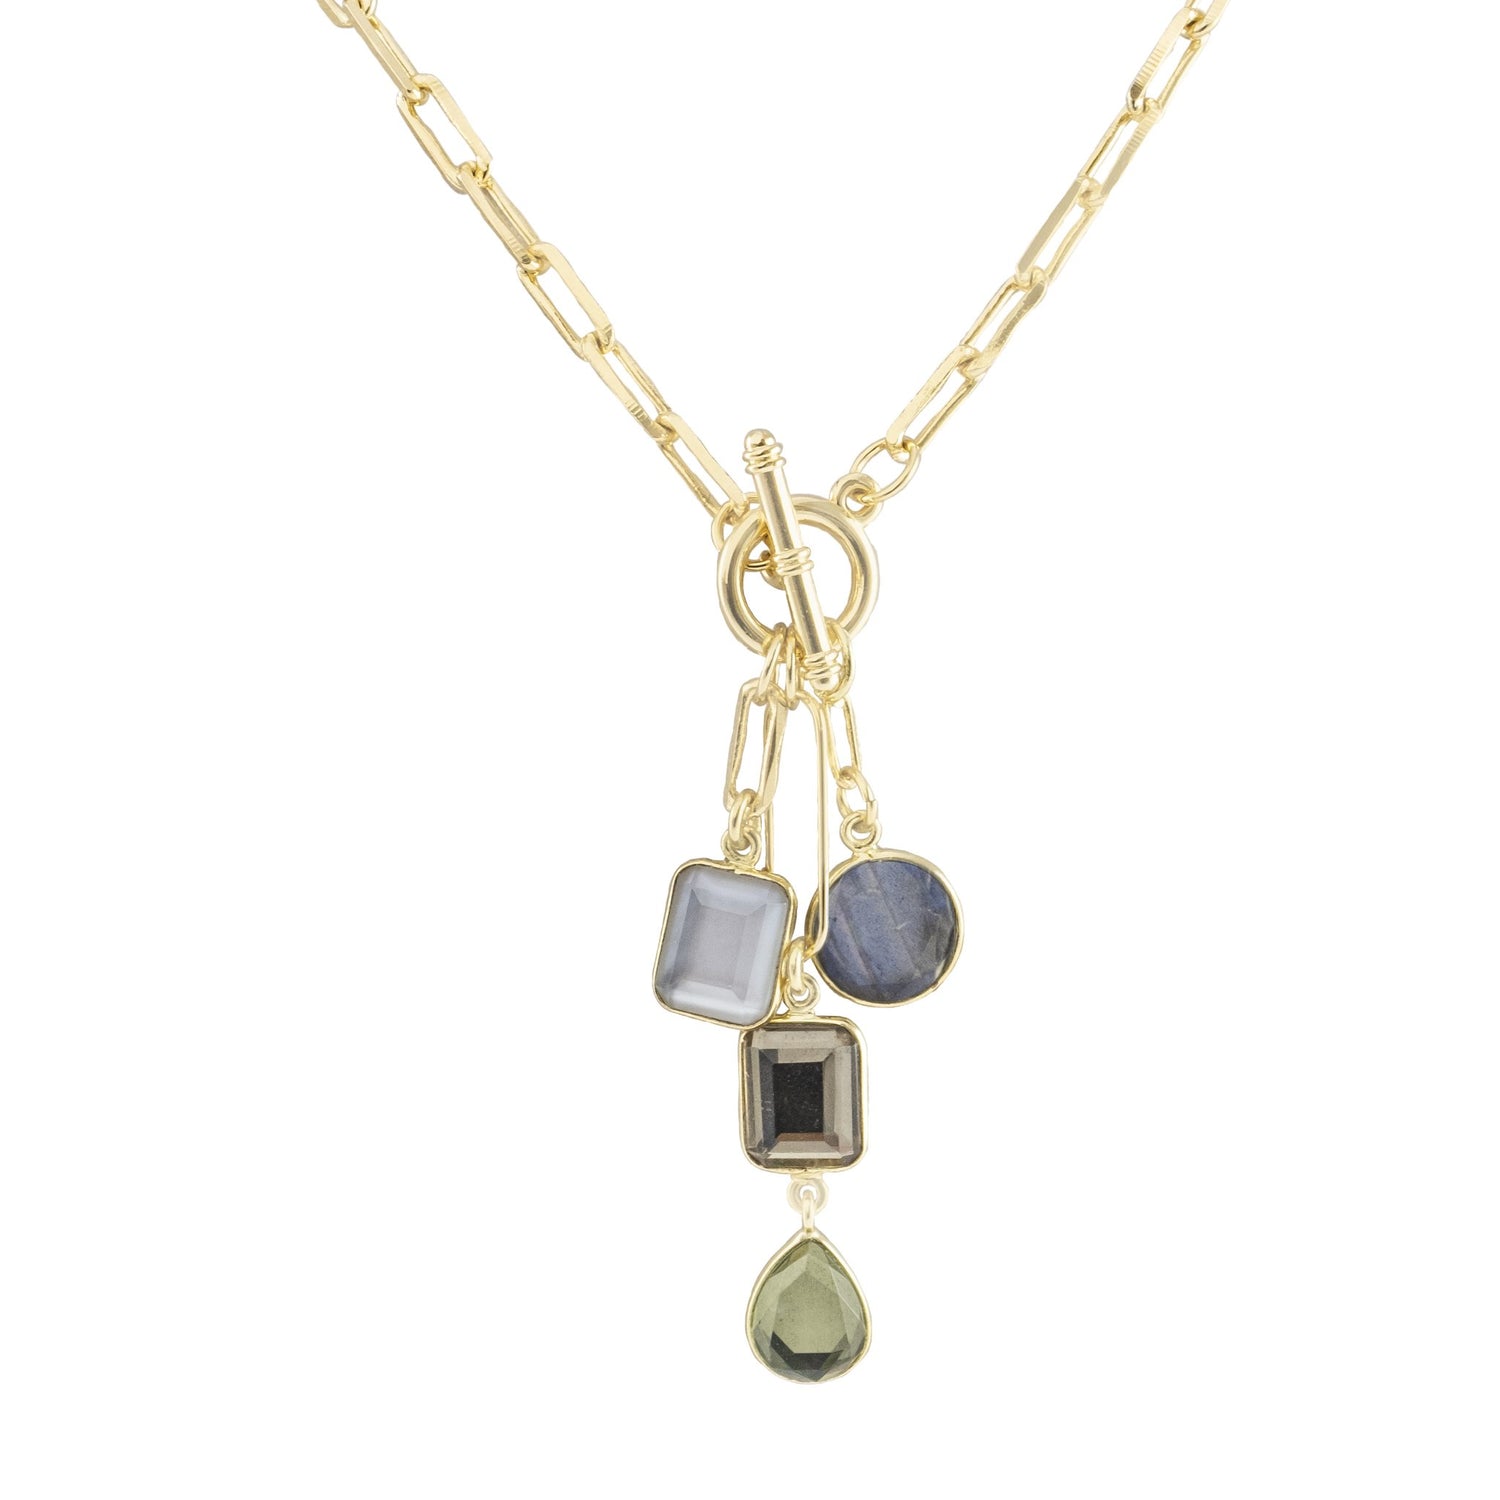 delicate short necklace with a multi-shape stone charms with front toggle